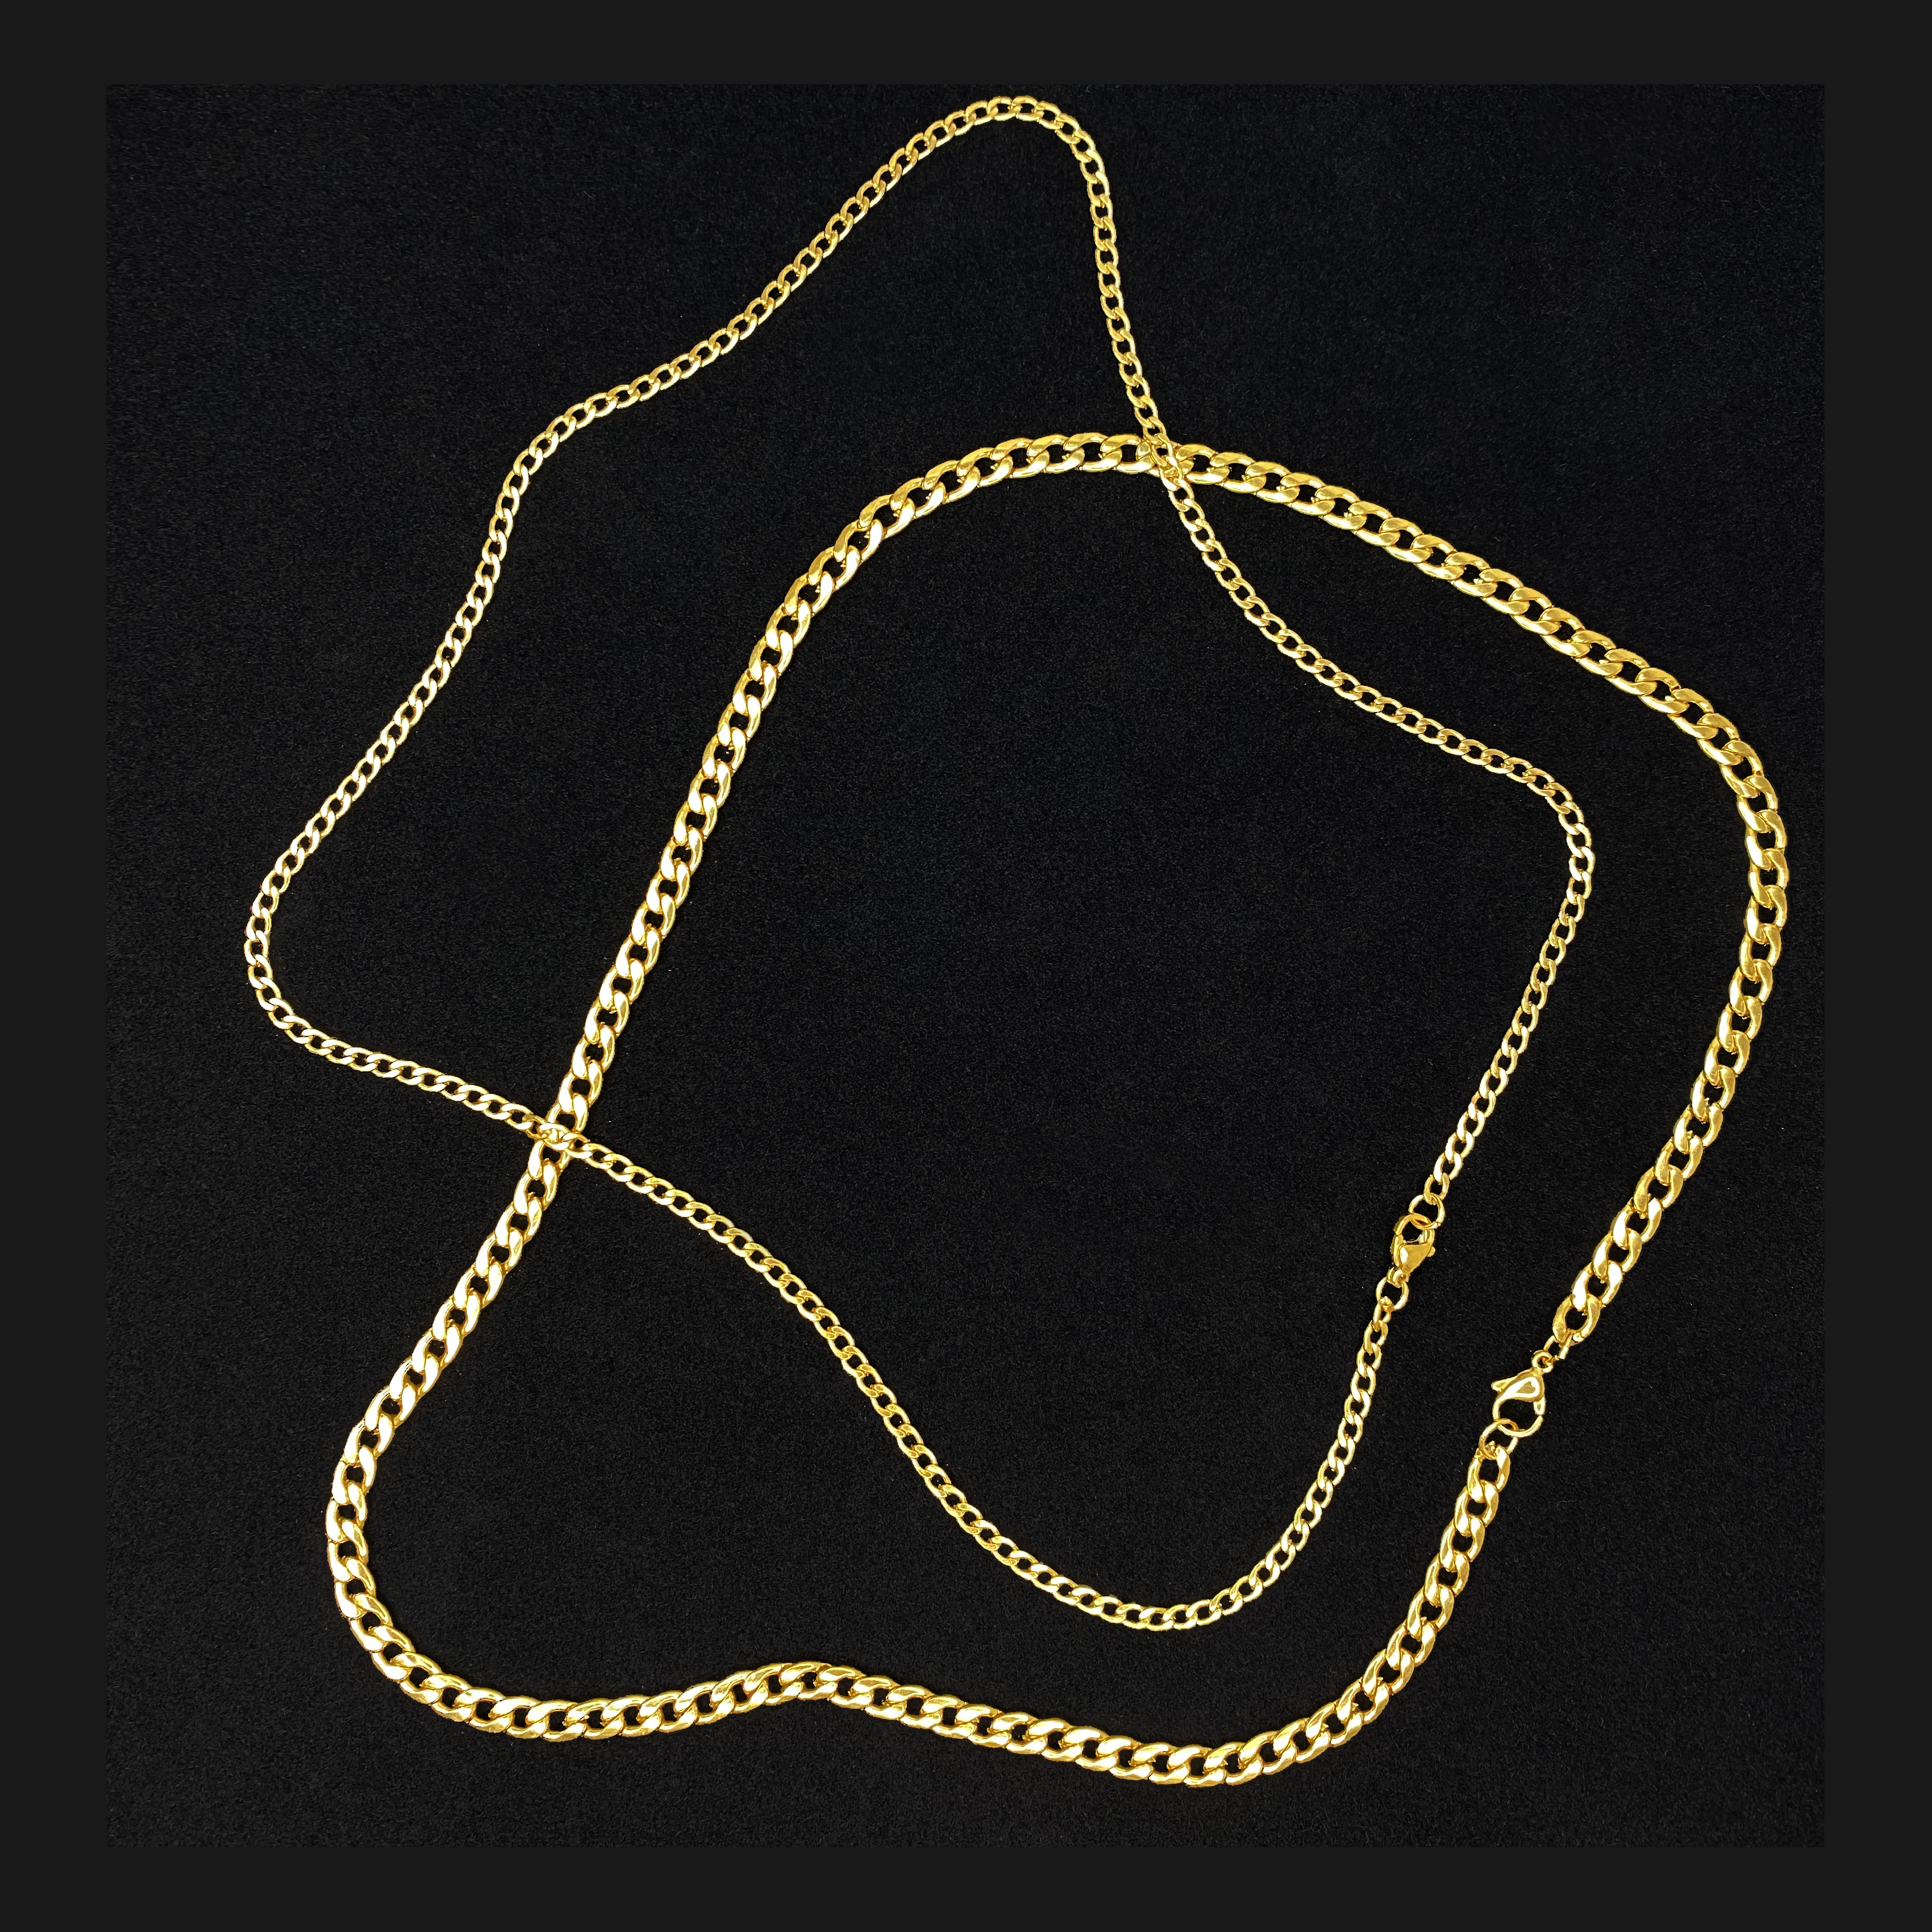 5mm Cuban Link Necklace, 22” Length. Hypoallergenic Stainless Steel with Real Gold PVD Coating